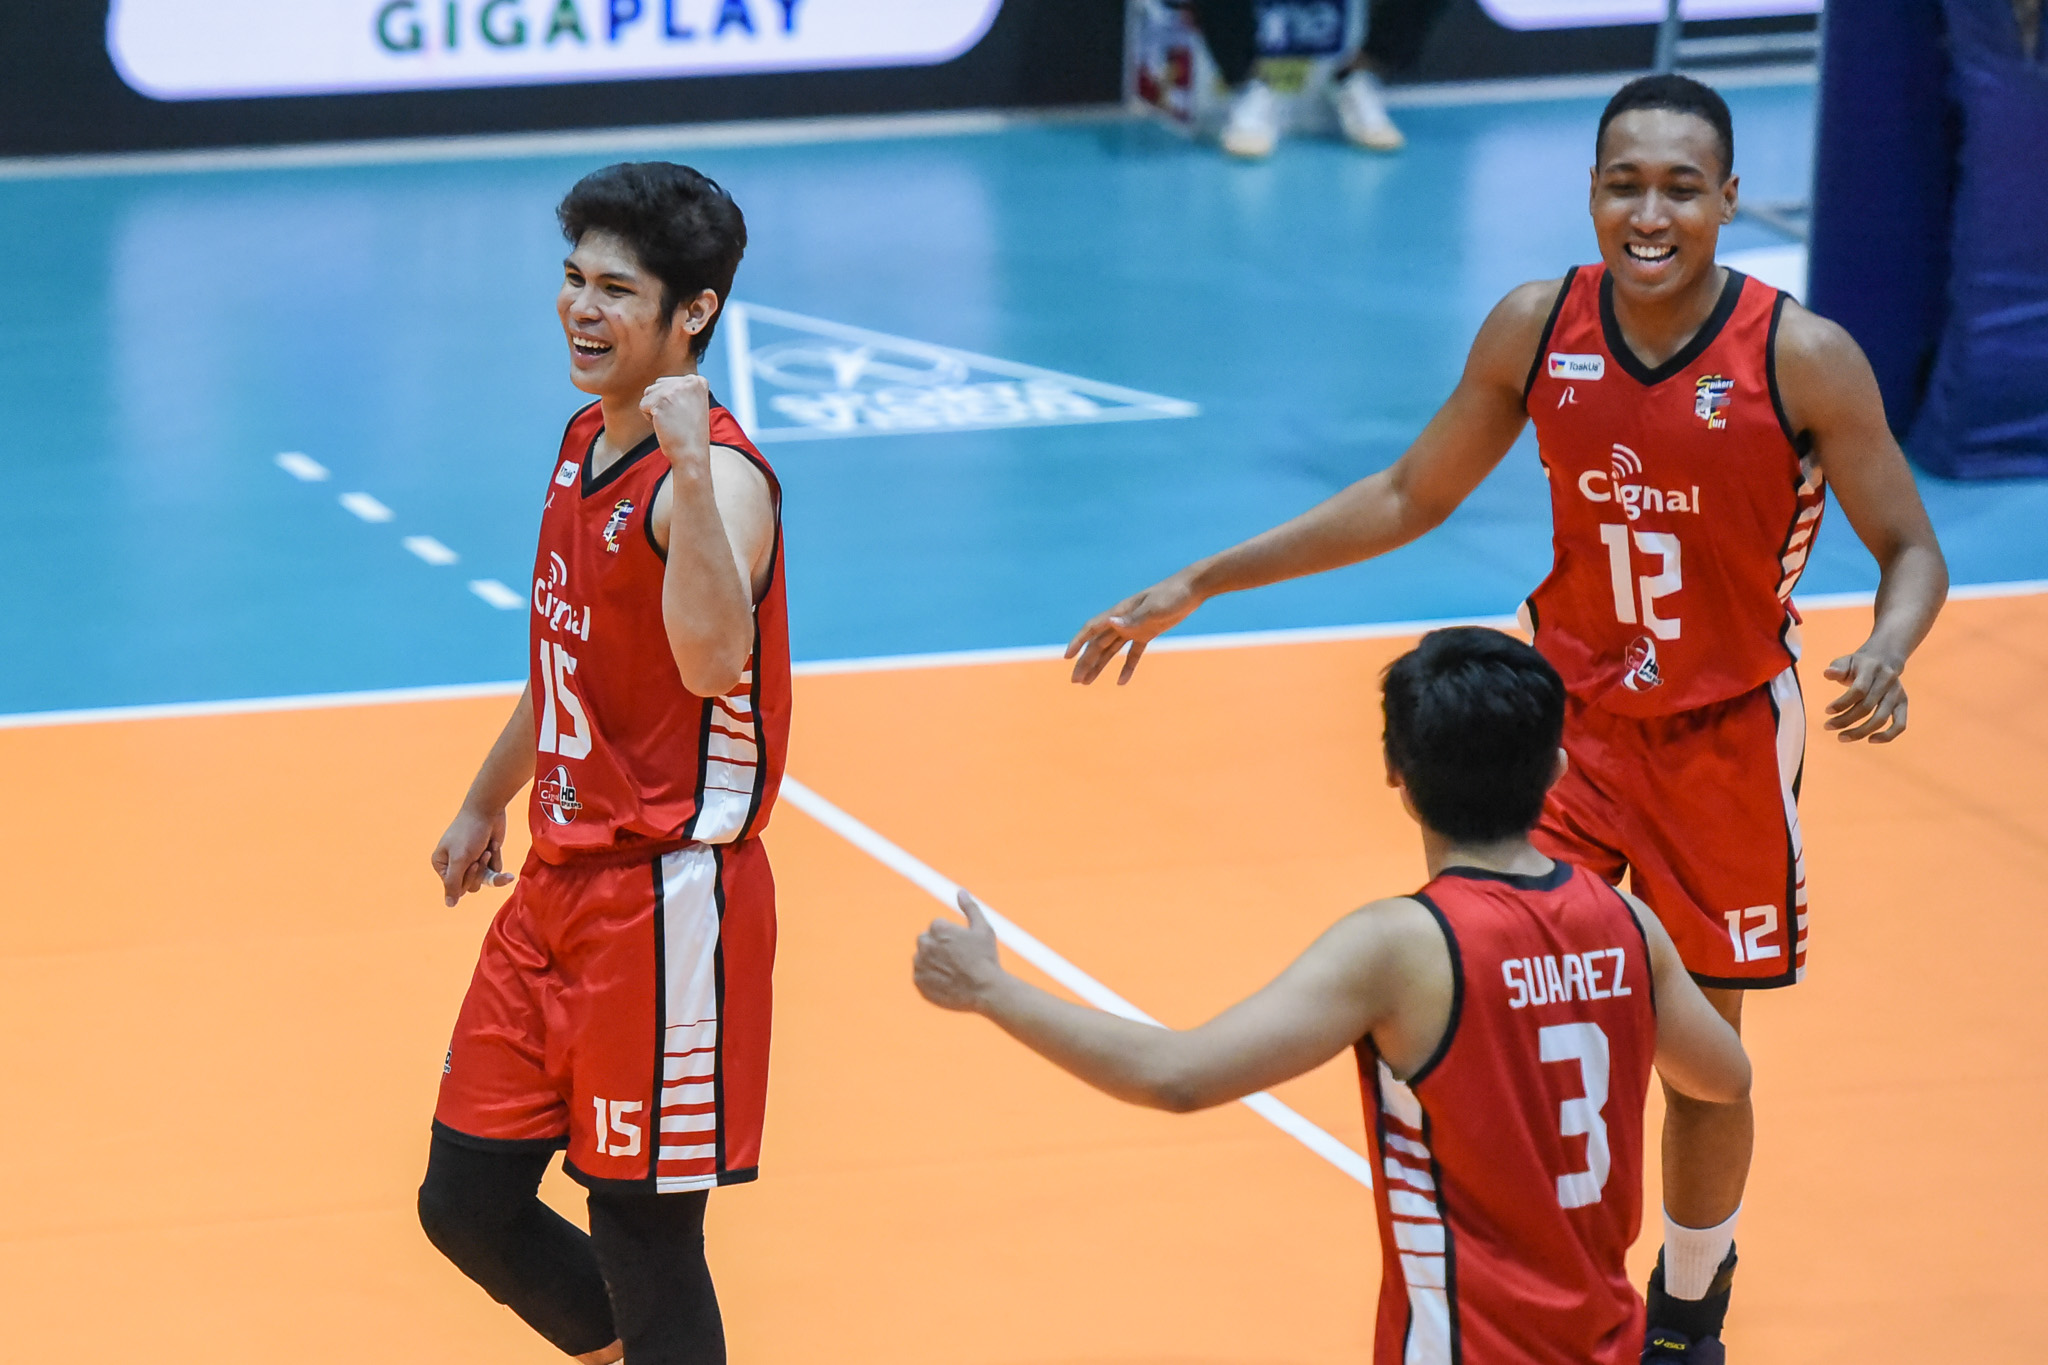 Spikers-Turf-2022-Cignal-vs.-NU-Finals-G1-Marck-Espejo-5070 Clamor stresses Cignal has to keep emotions in check to stay alive News Spikers' Turf Volleyball  - philippine sports news